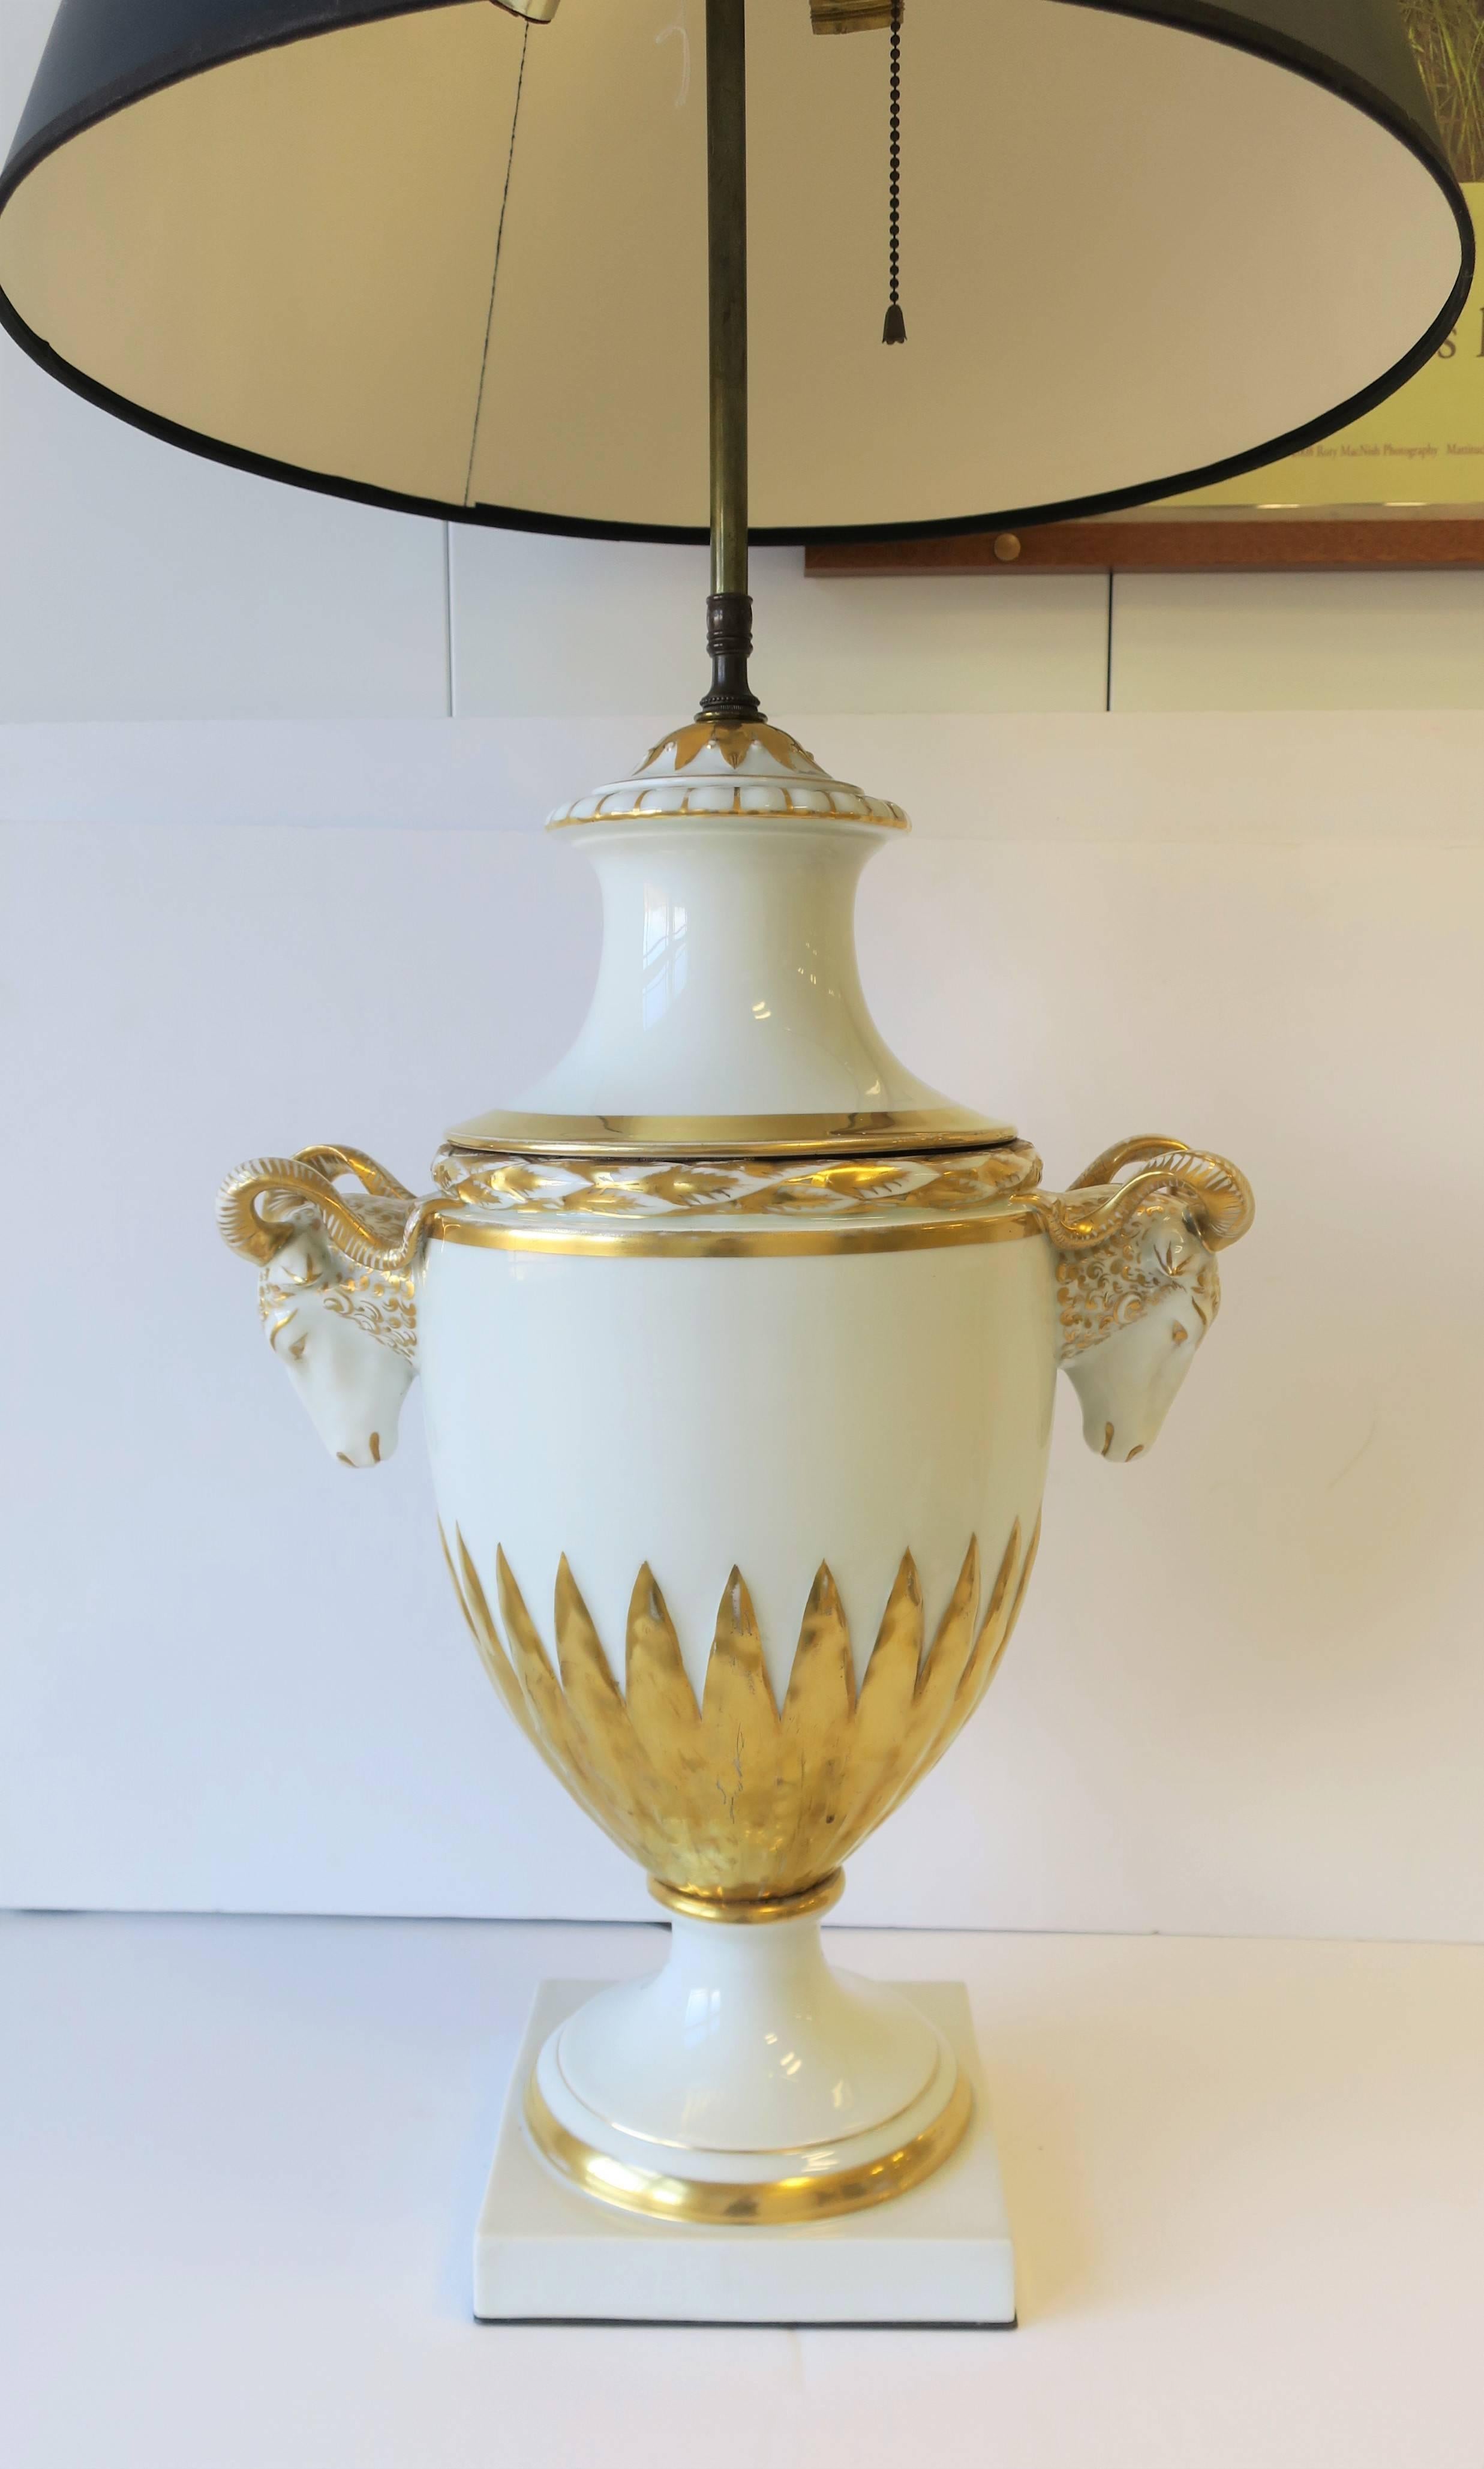 Urn and Rams Head White & Gold Porcelain Table Lamp Empire Style, German, Large In Good Condition For Sale In New York, NY